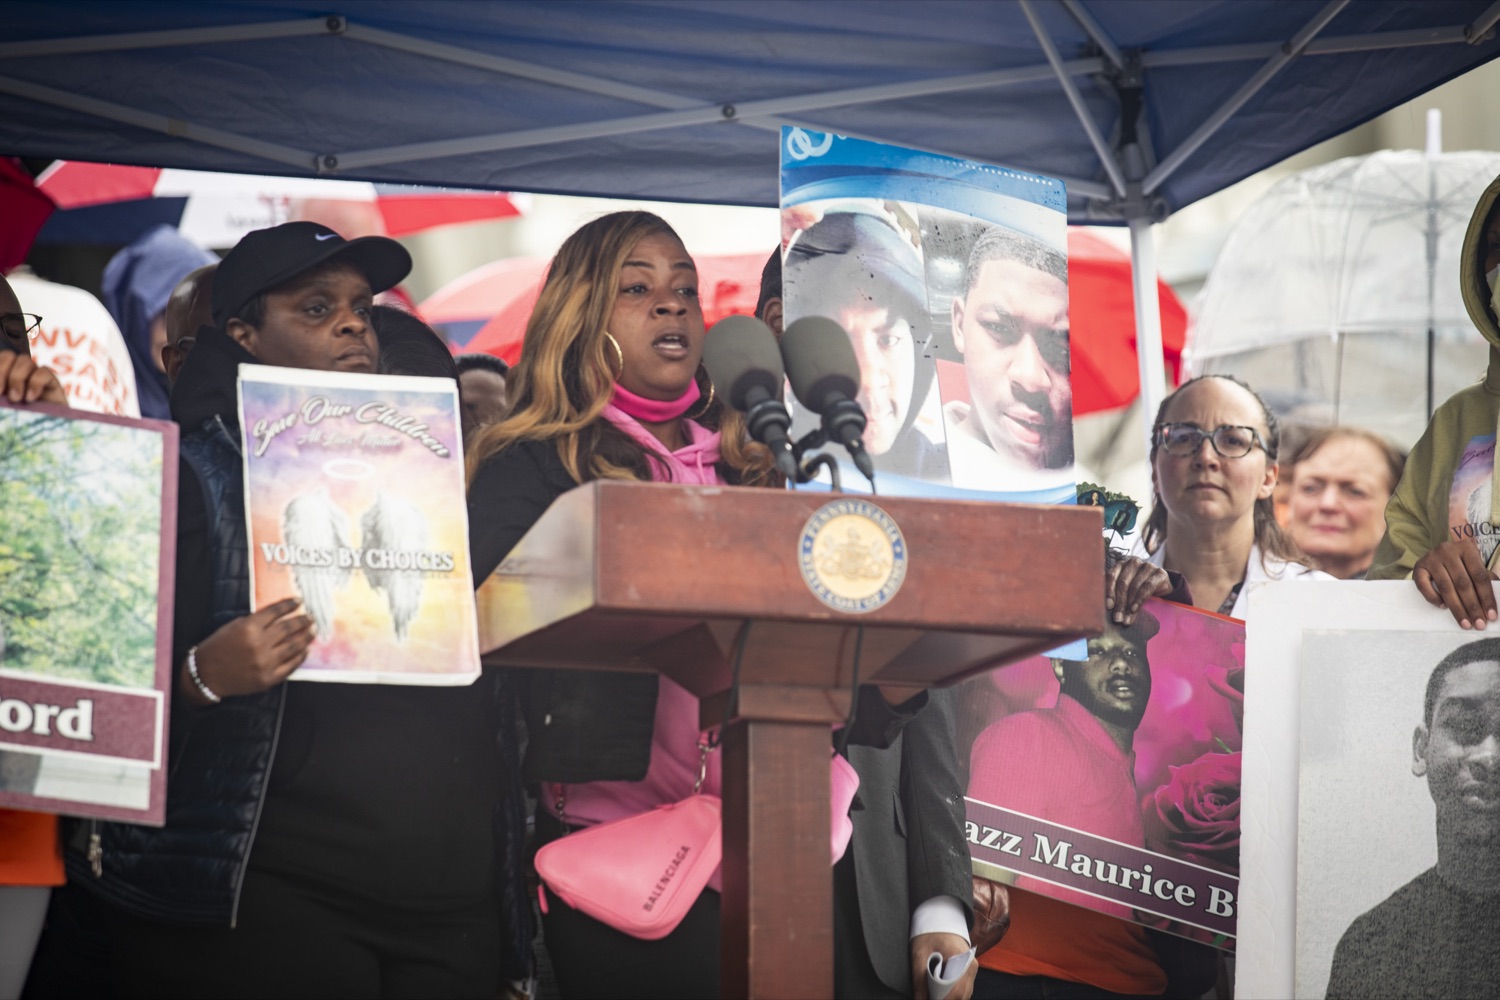 Tahira Fortune, Mother of Samir and Founder of Voices for Choices, calls for legislative action to save lives against gun violence, in Harrisburg, PA on April 26, 2022.<br><a href="https://filesource.amperwave.net/commonwealthofpa/photo/20782_gov_ceaseFirePA_19.JPG" target="_blank">⇣ Download Photo</a>